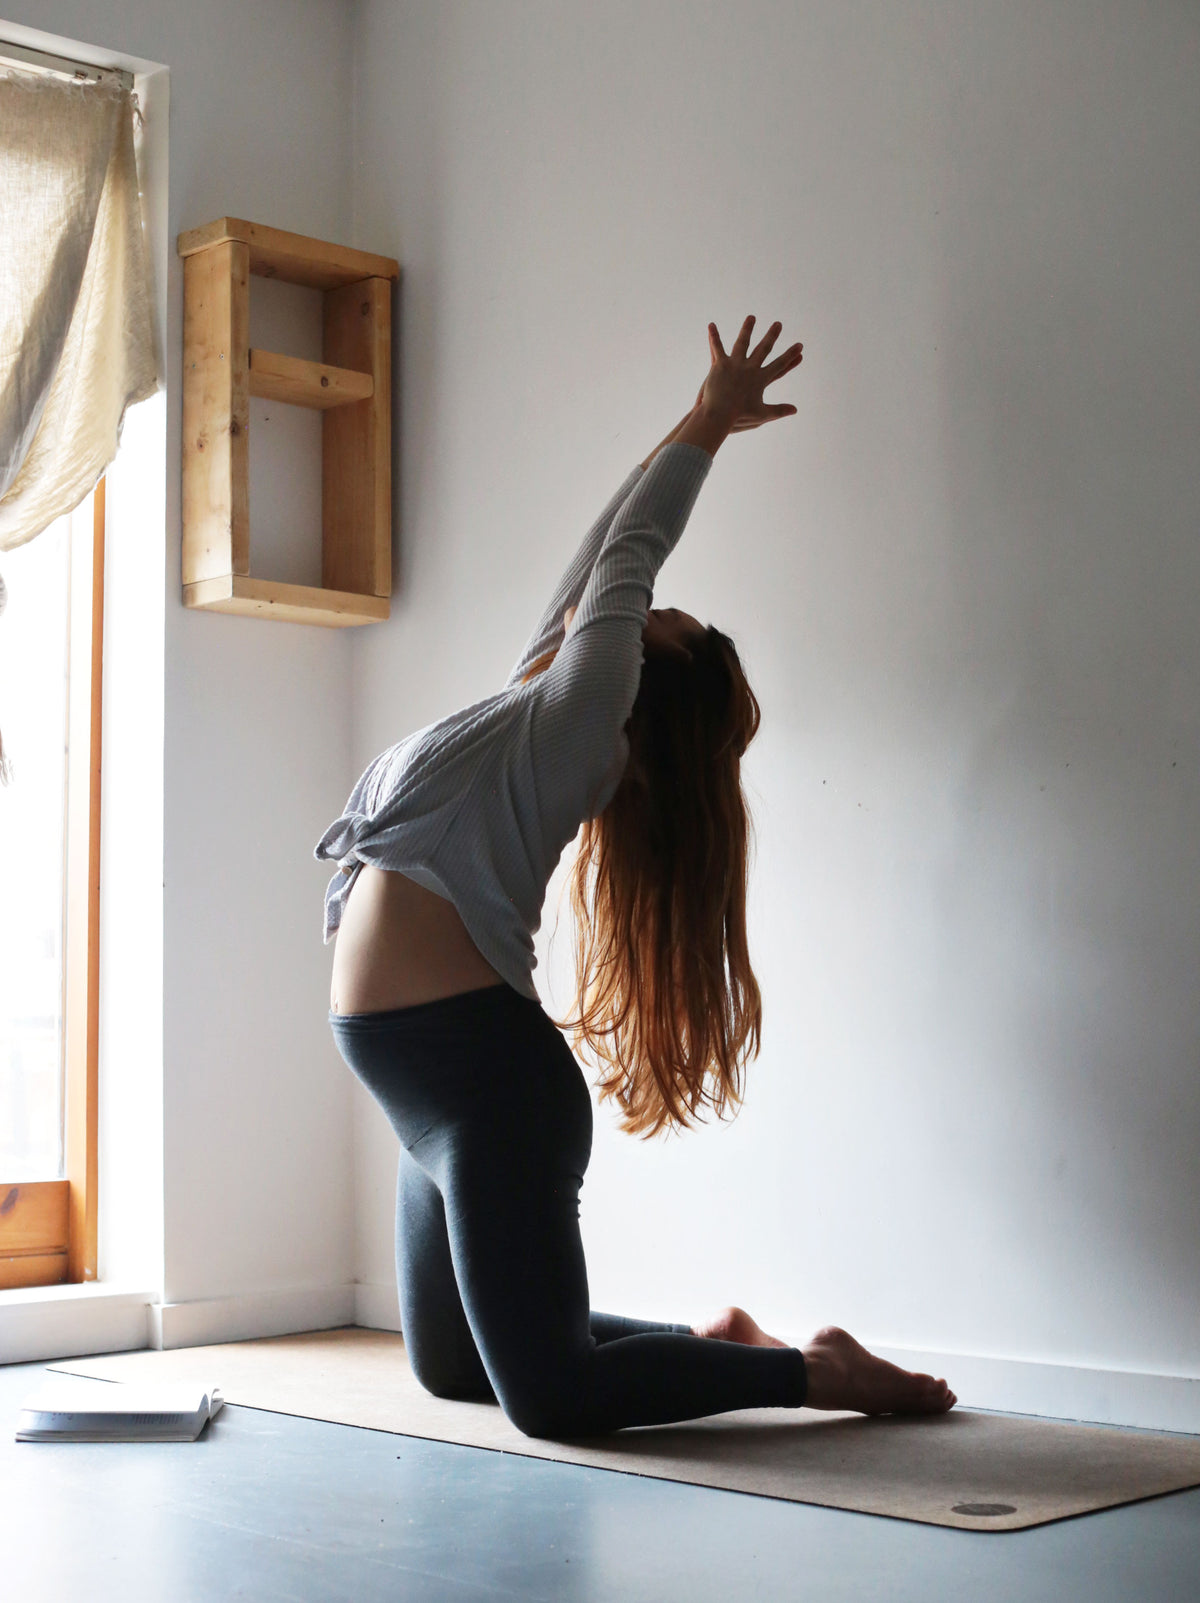 Yoga in pregnancy: Many poses are safer than once thought